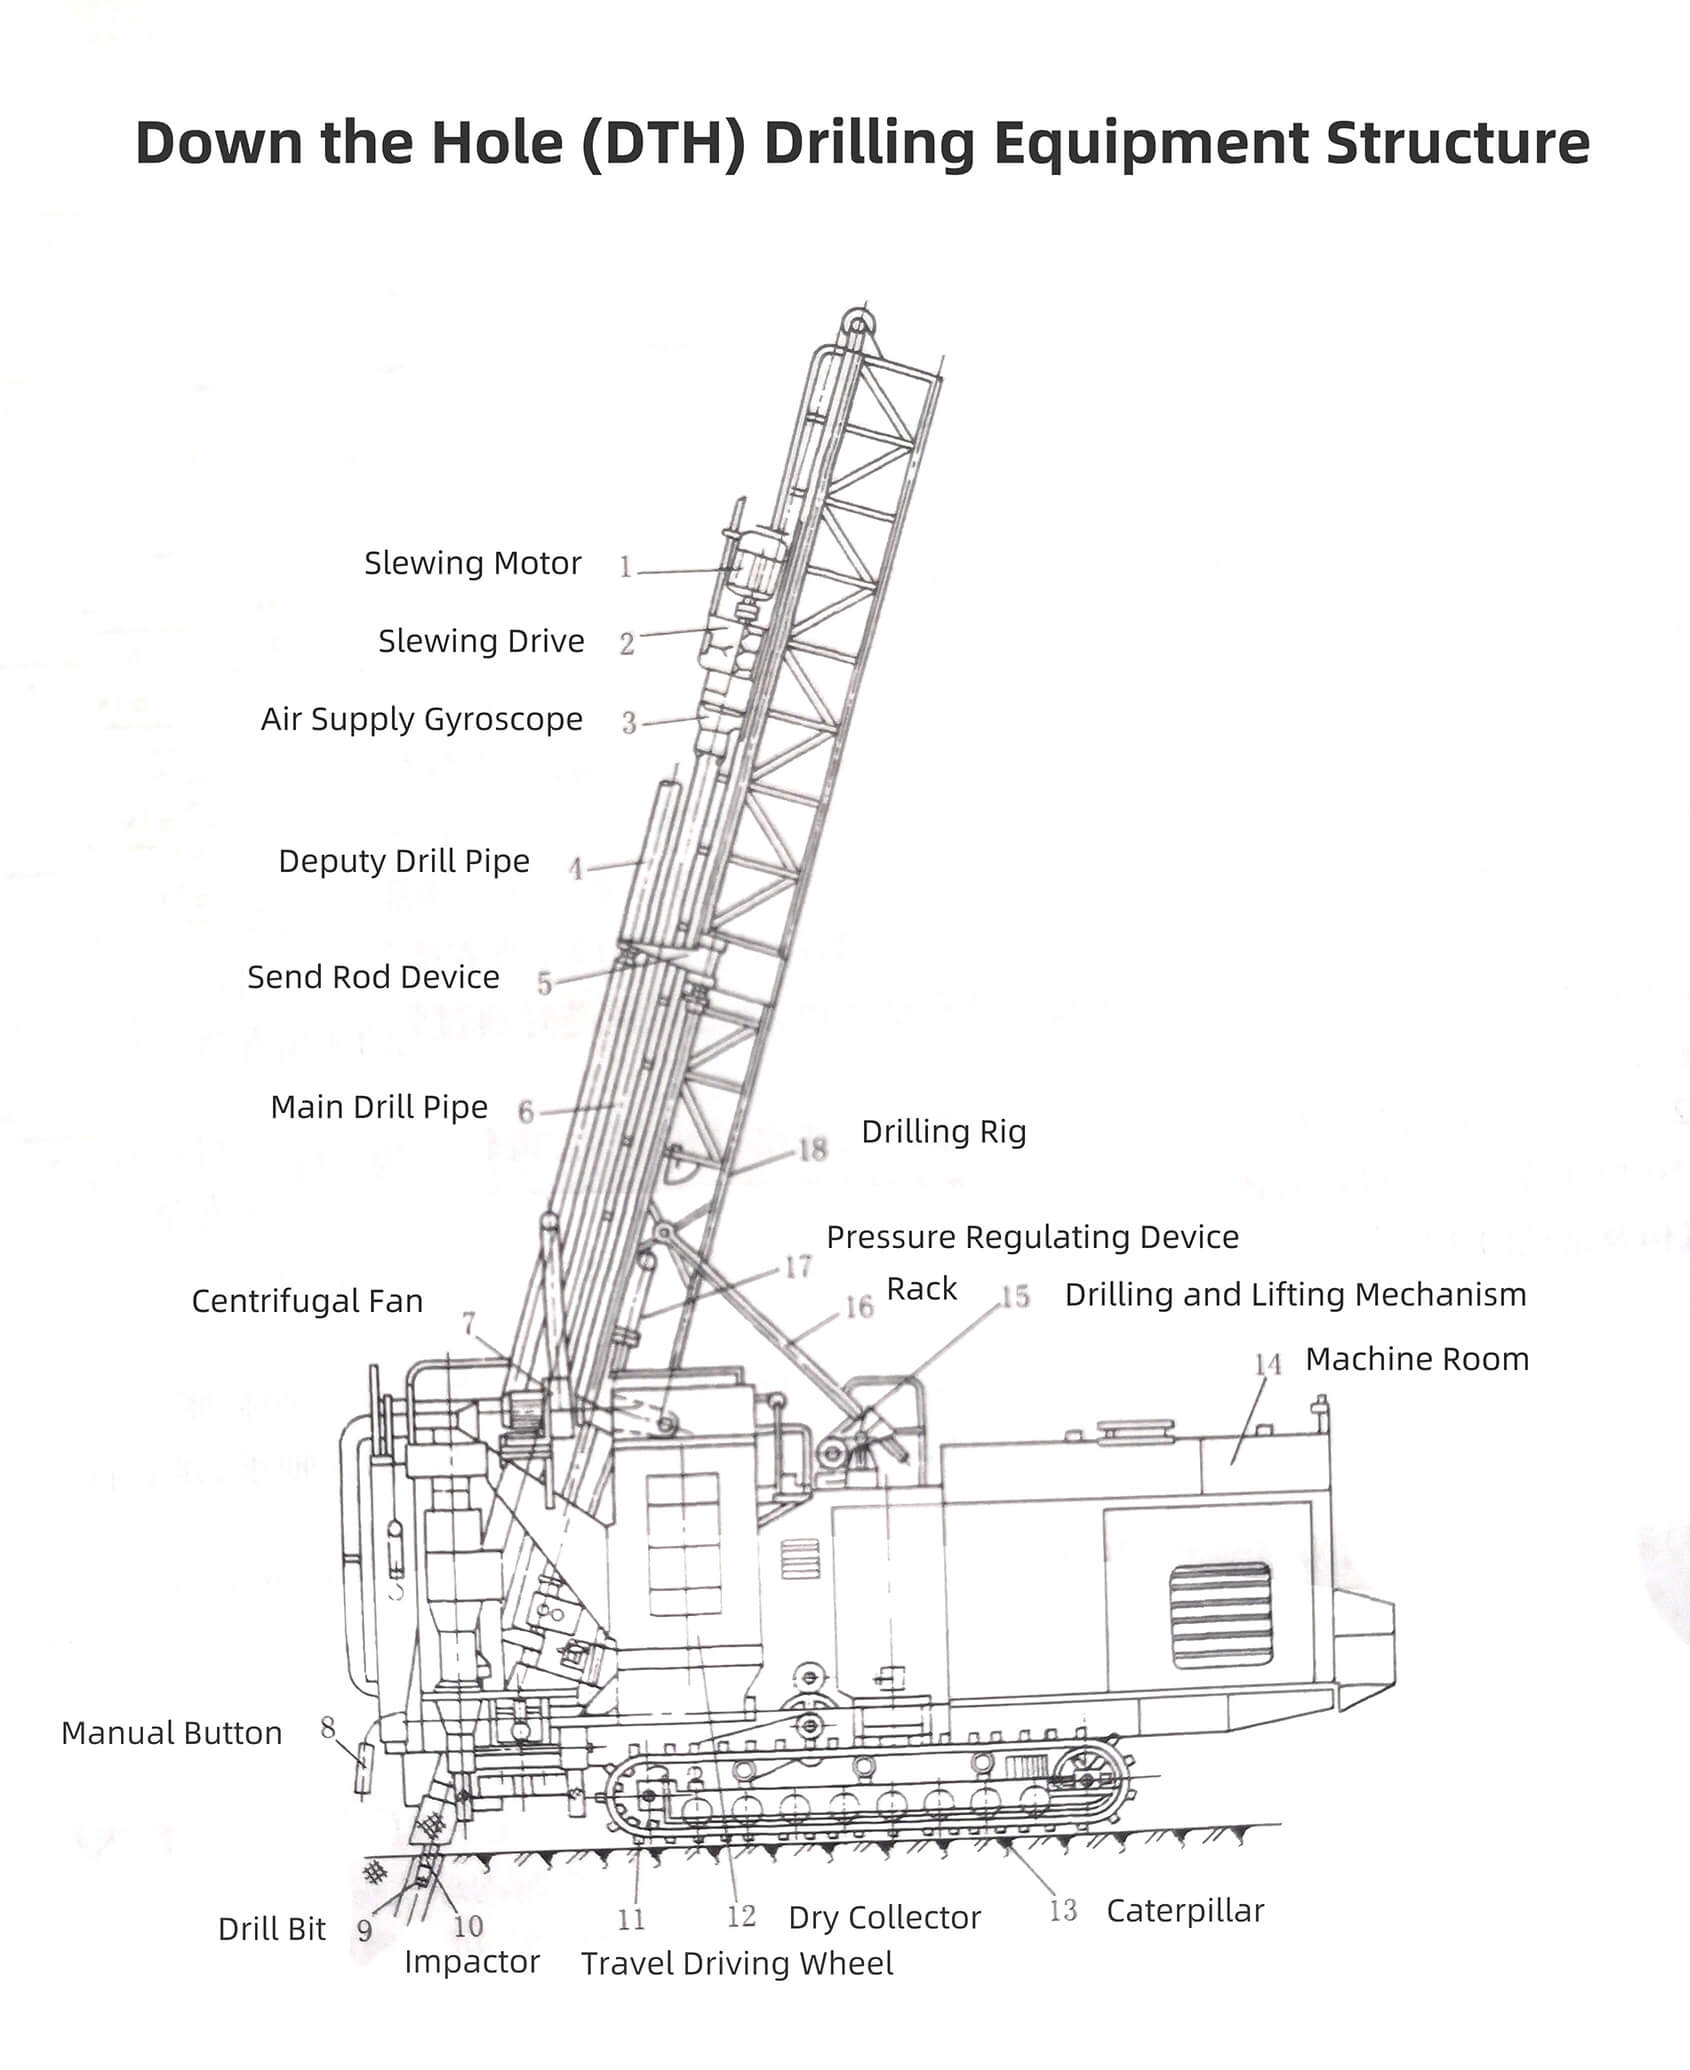 Down the Hole (DTH) Drilling Equipment0.jpg